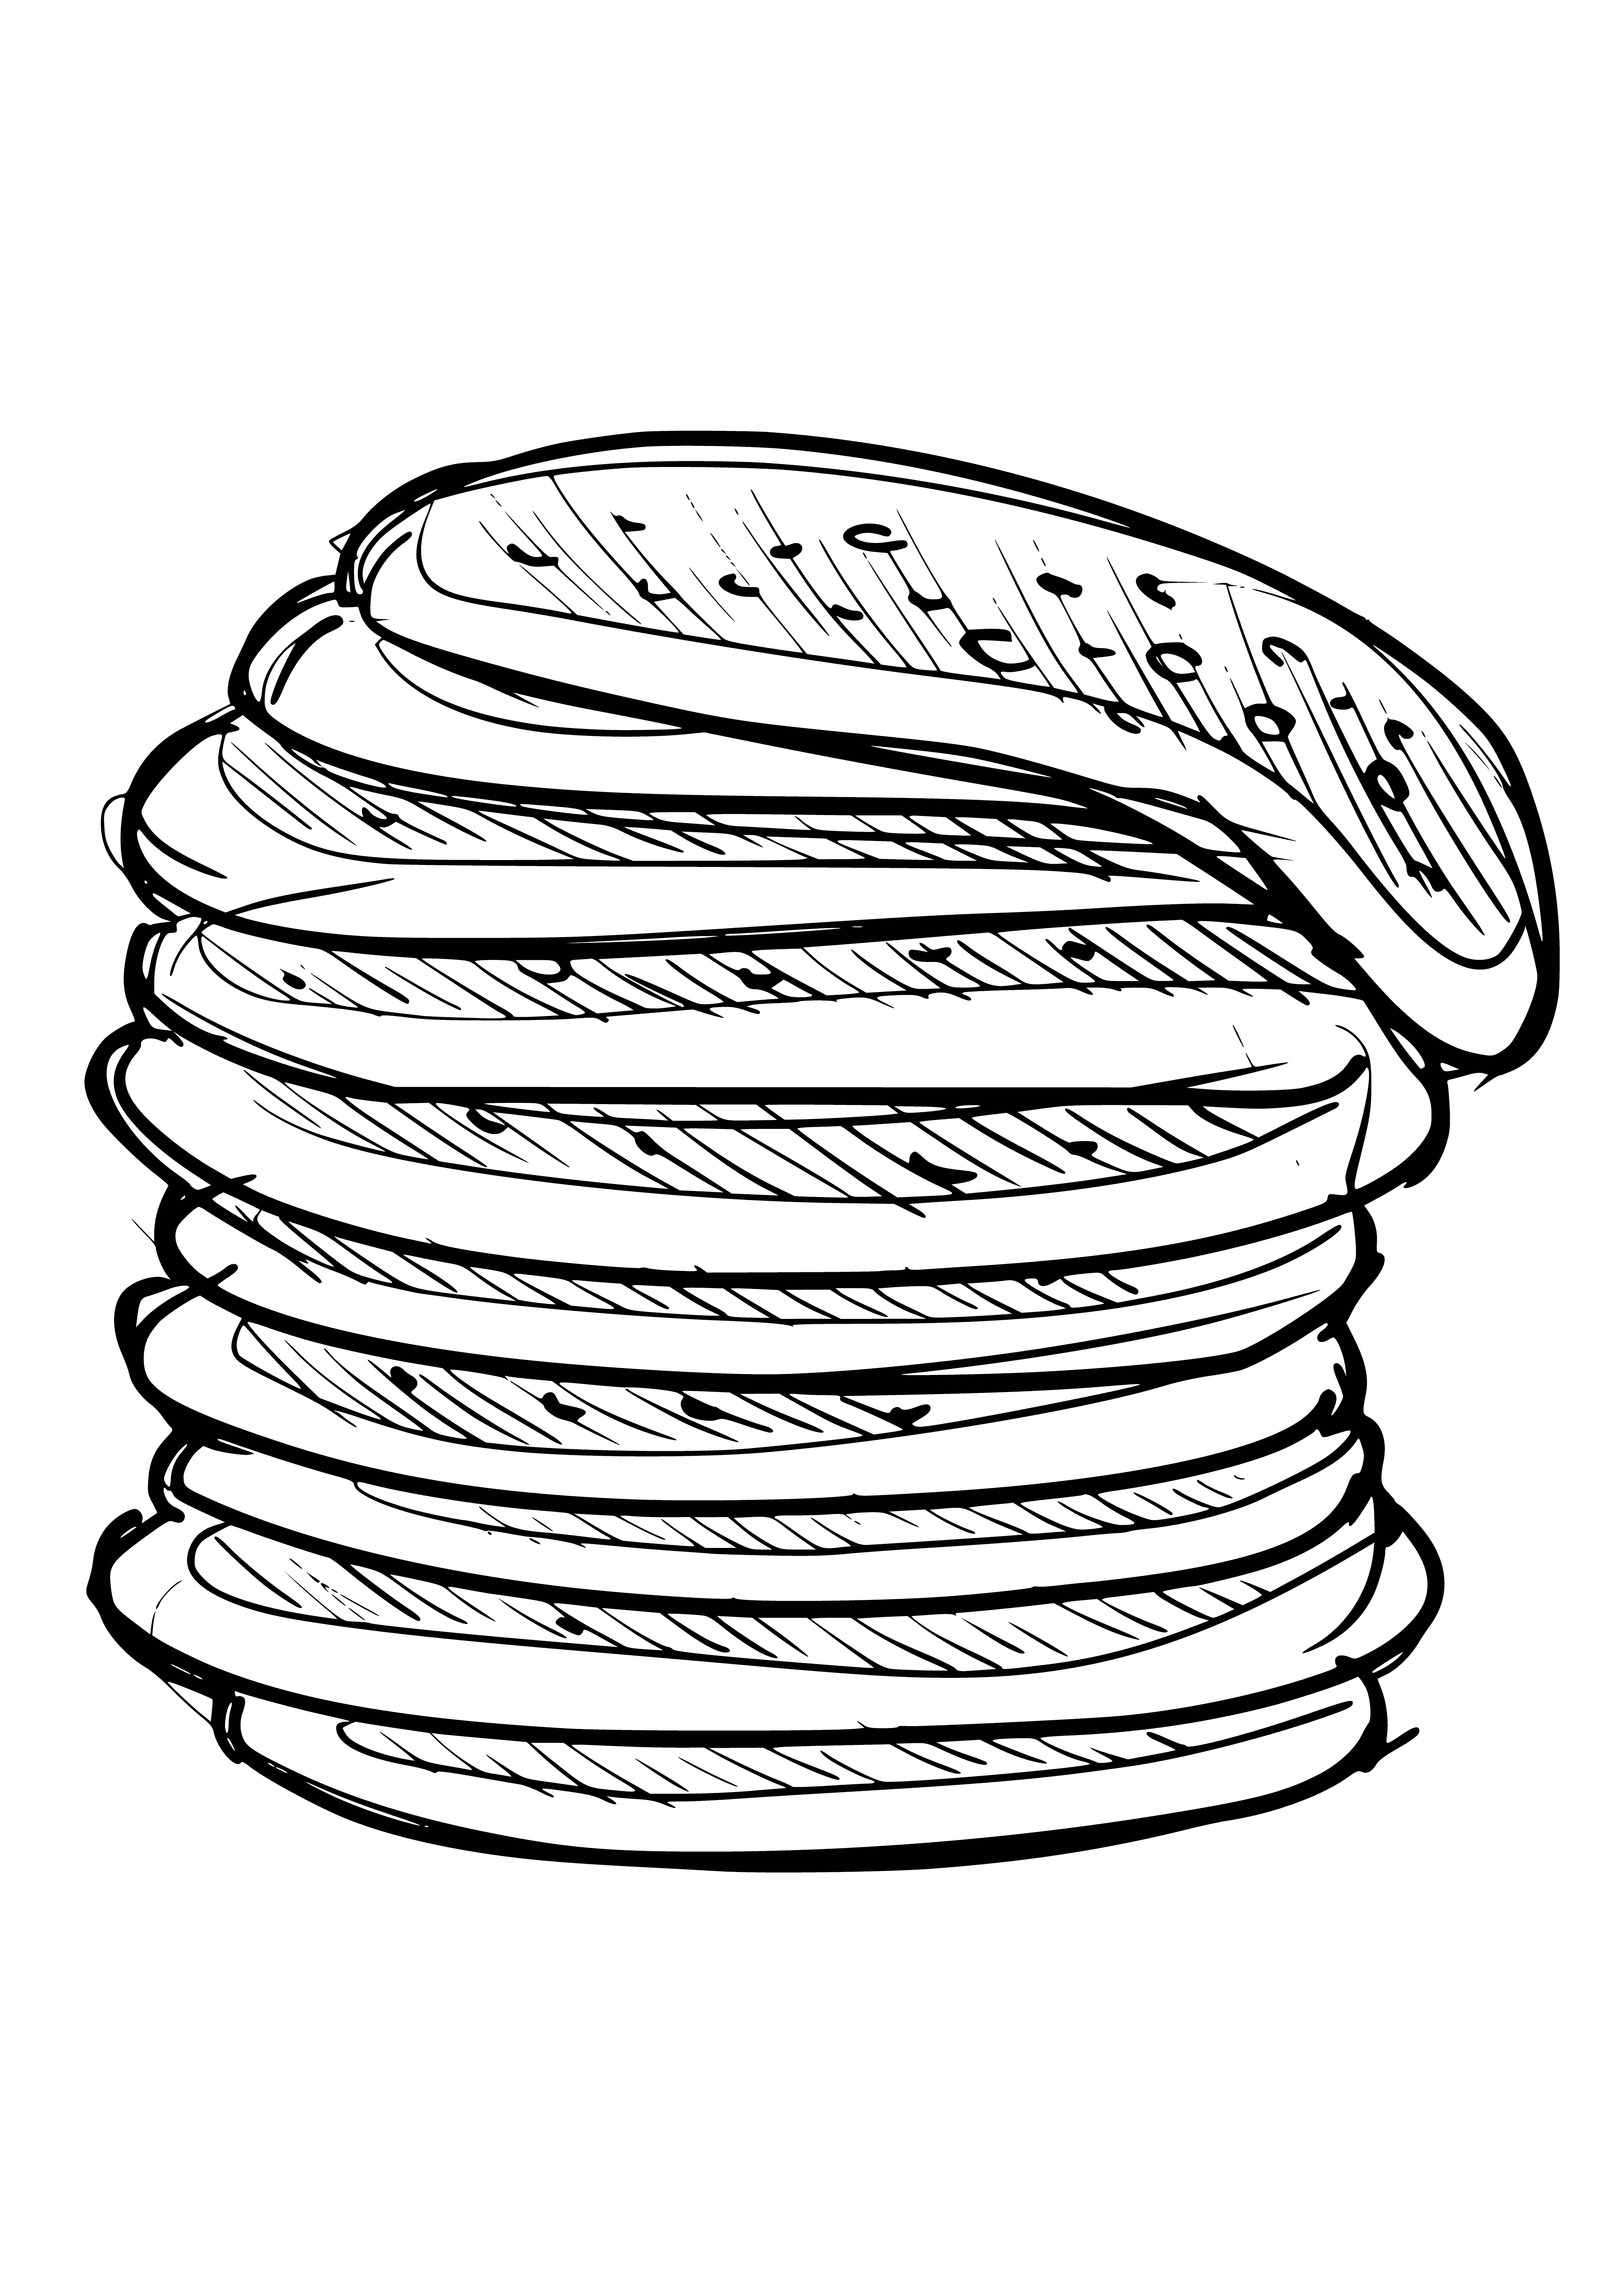 Pancakes for Shrovetide coloring page